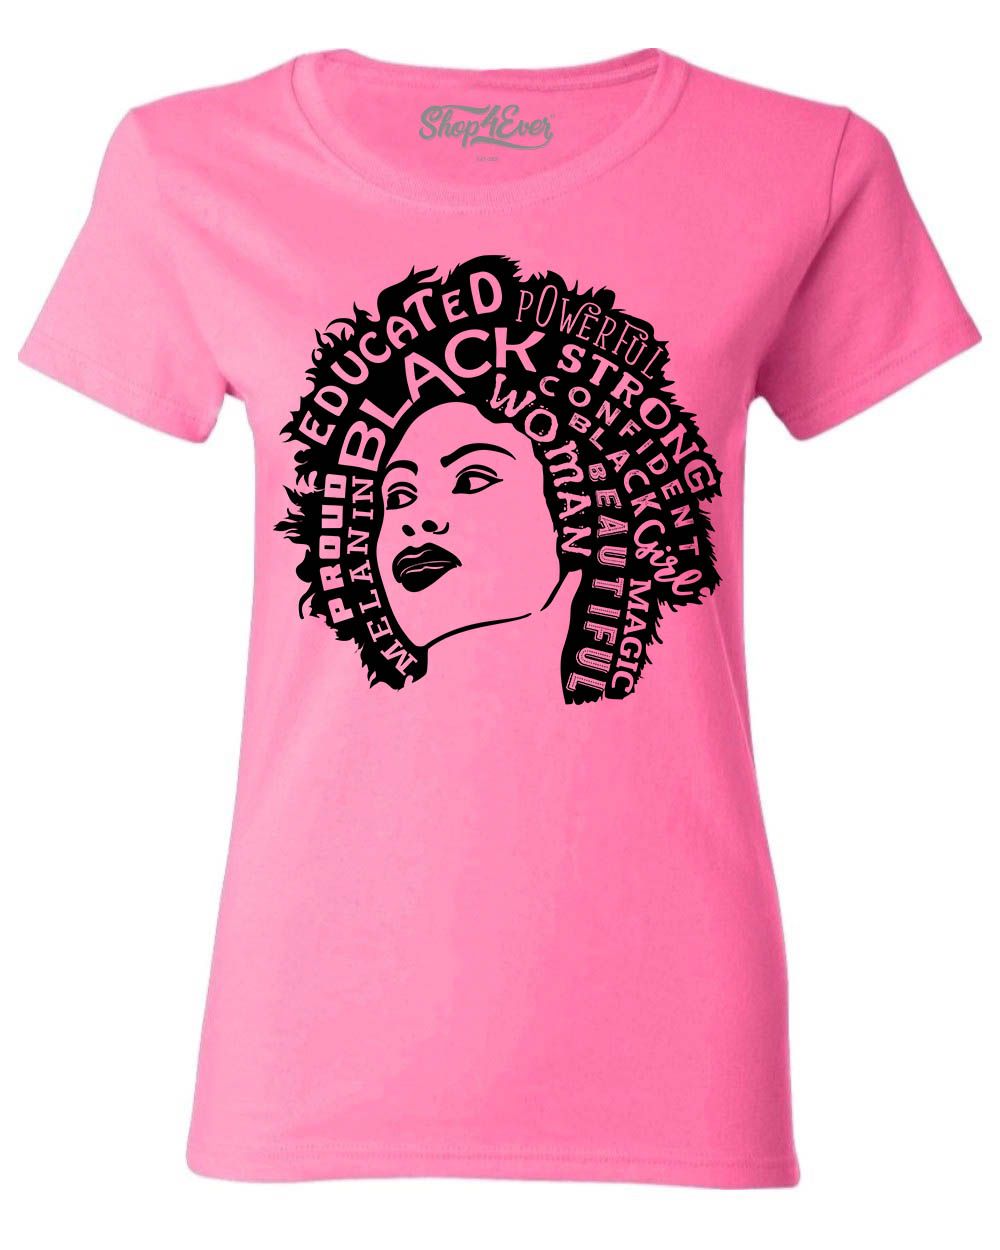 Shop4Ever Women's African American Woman Afro Word Cloud Graphic T-Shirt XXX-Large Azalea Pink - image 1 of 5